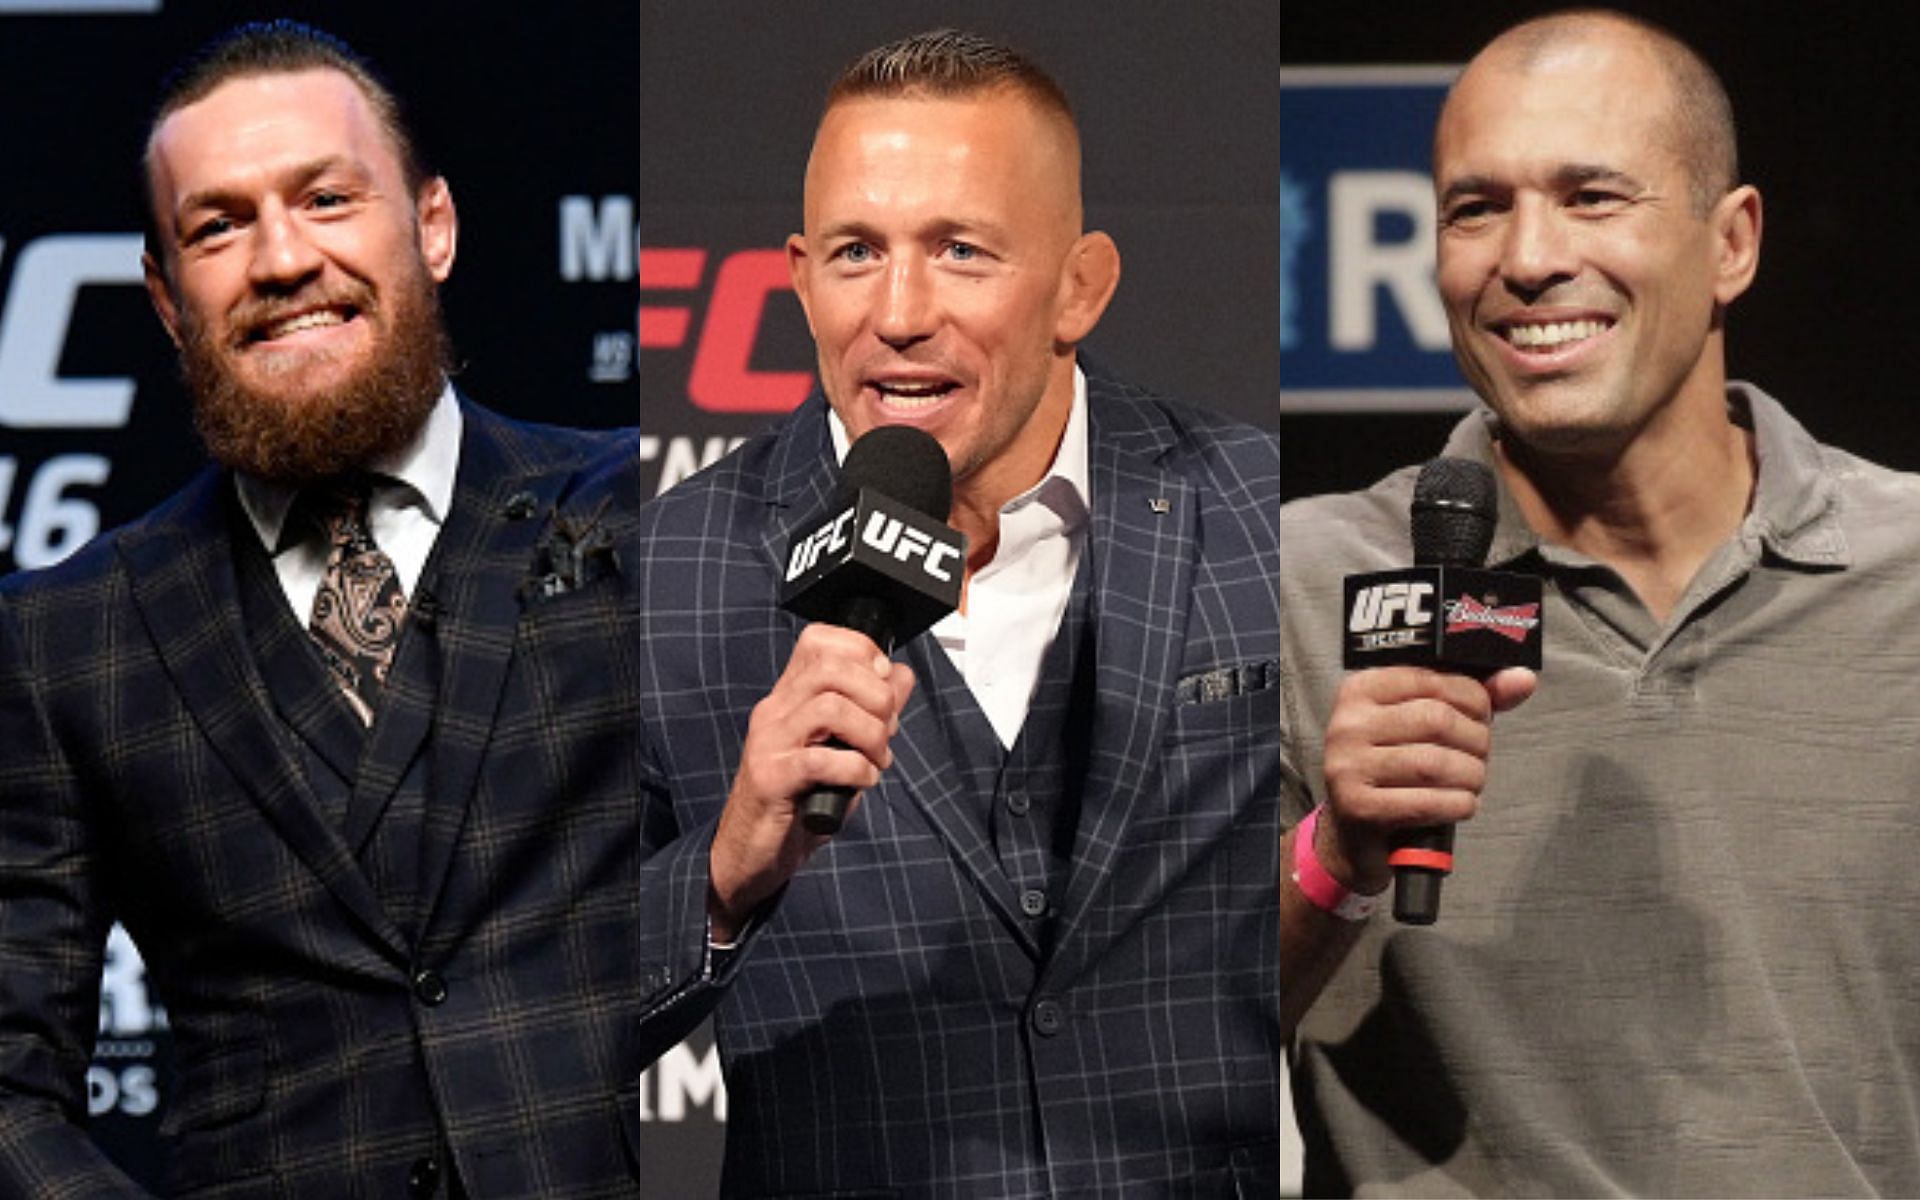 Conor McGregor (left), Georges St-Pierre (middle), Royce Gracie (right)